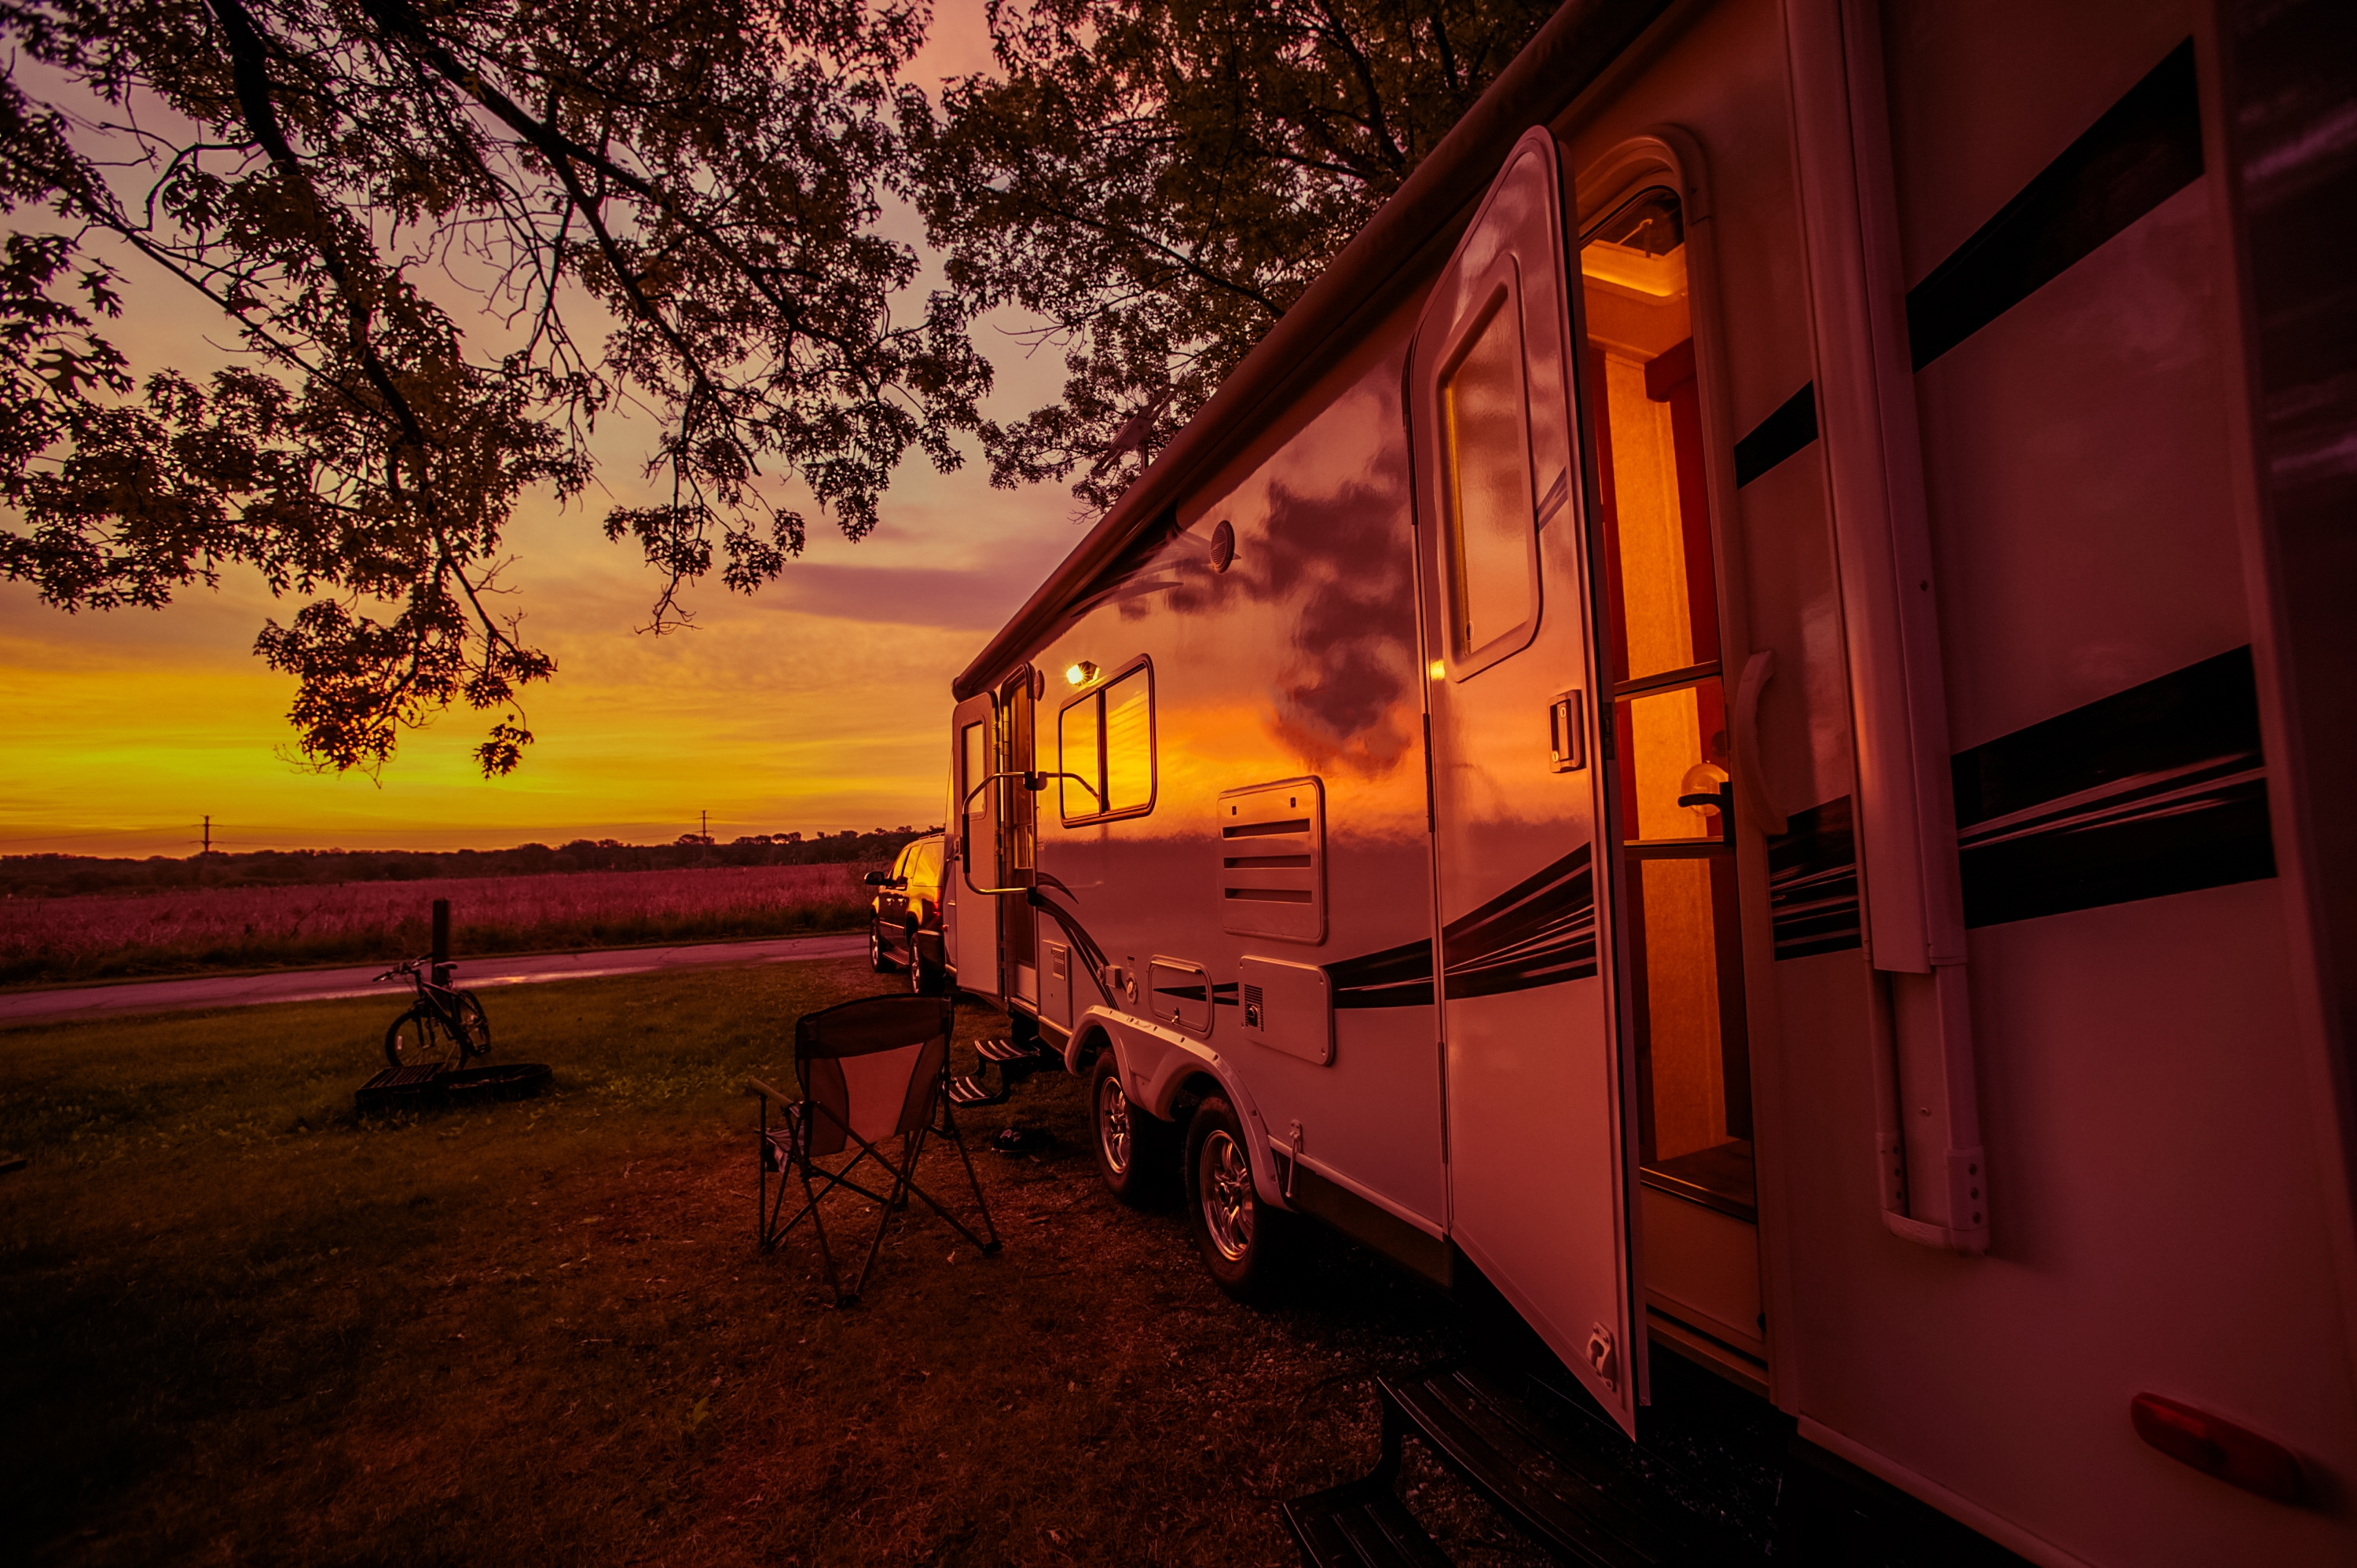 Saving energy when camping in your RV